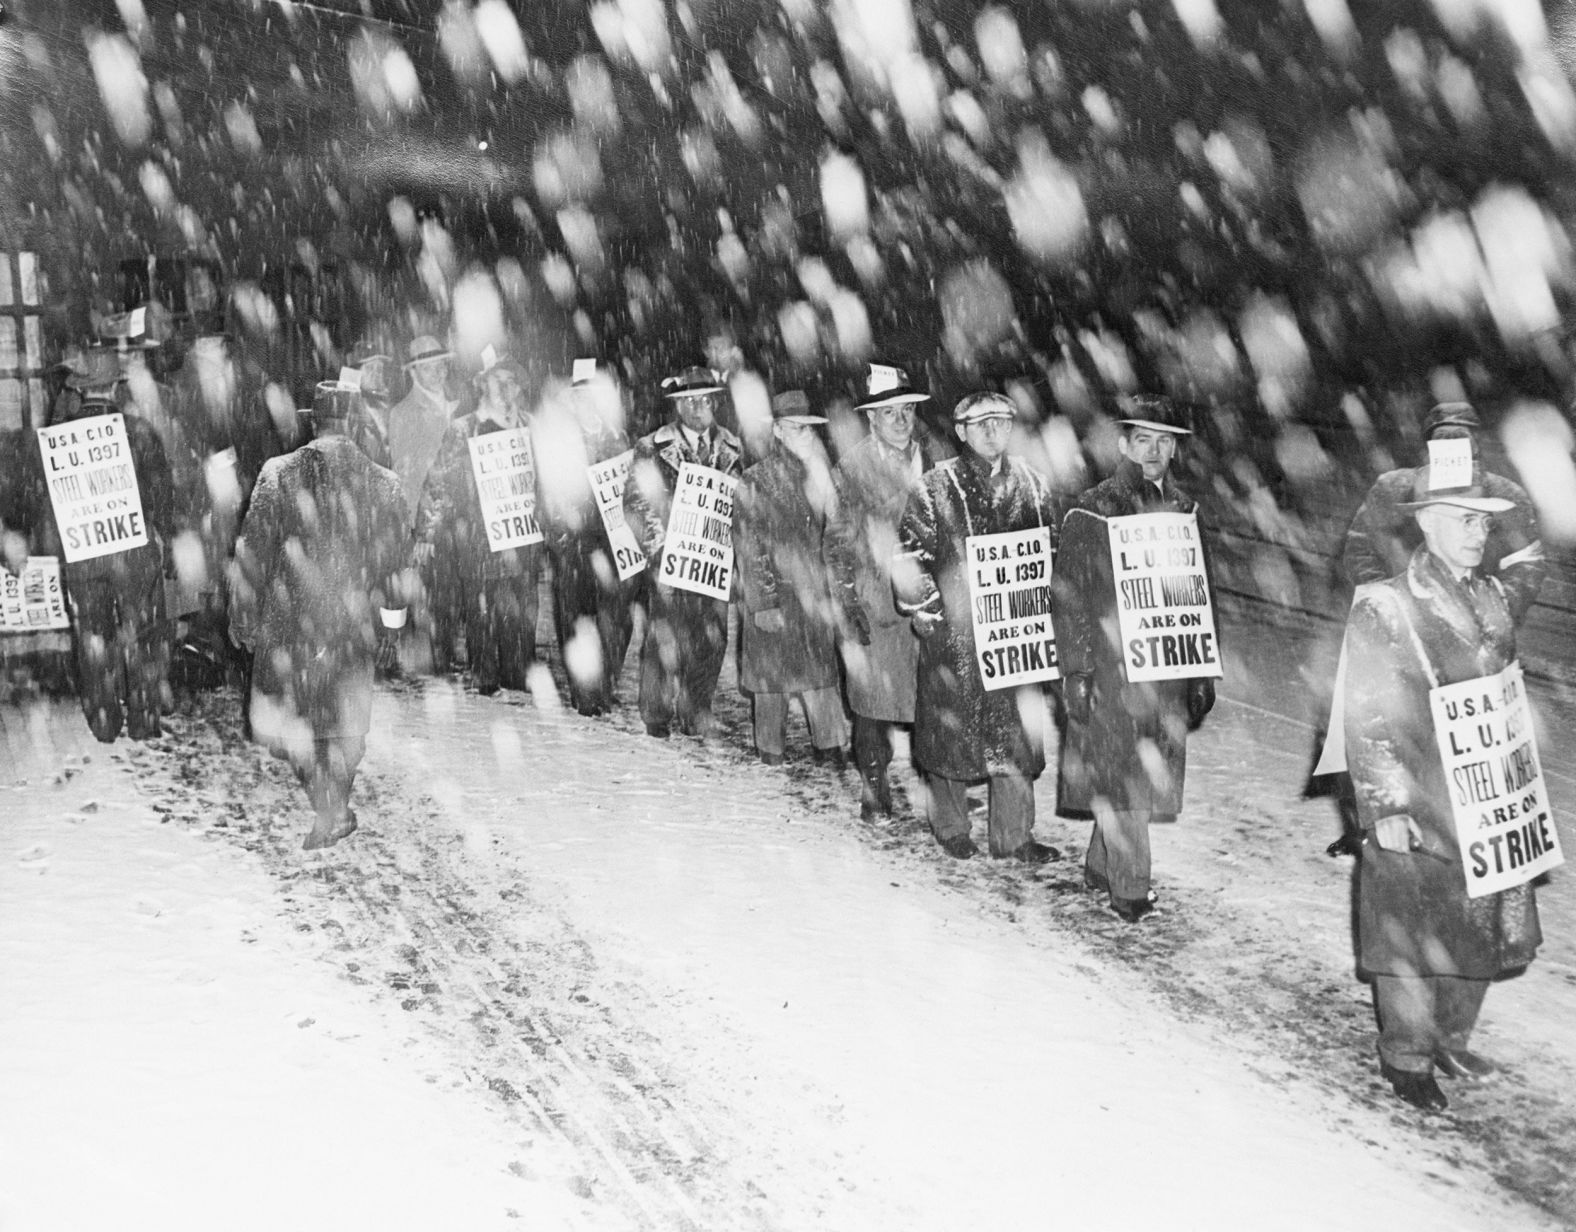 Striking steelworkers picket in Homestead, Pennsylvania, in 1946. An estimated 750,000 workers took part in the walkout, shutting down 1,200 plants in 30 states.